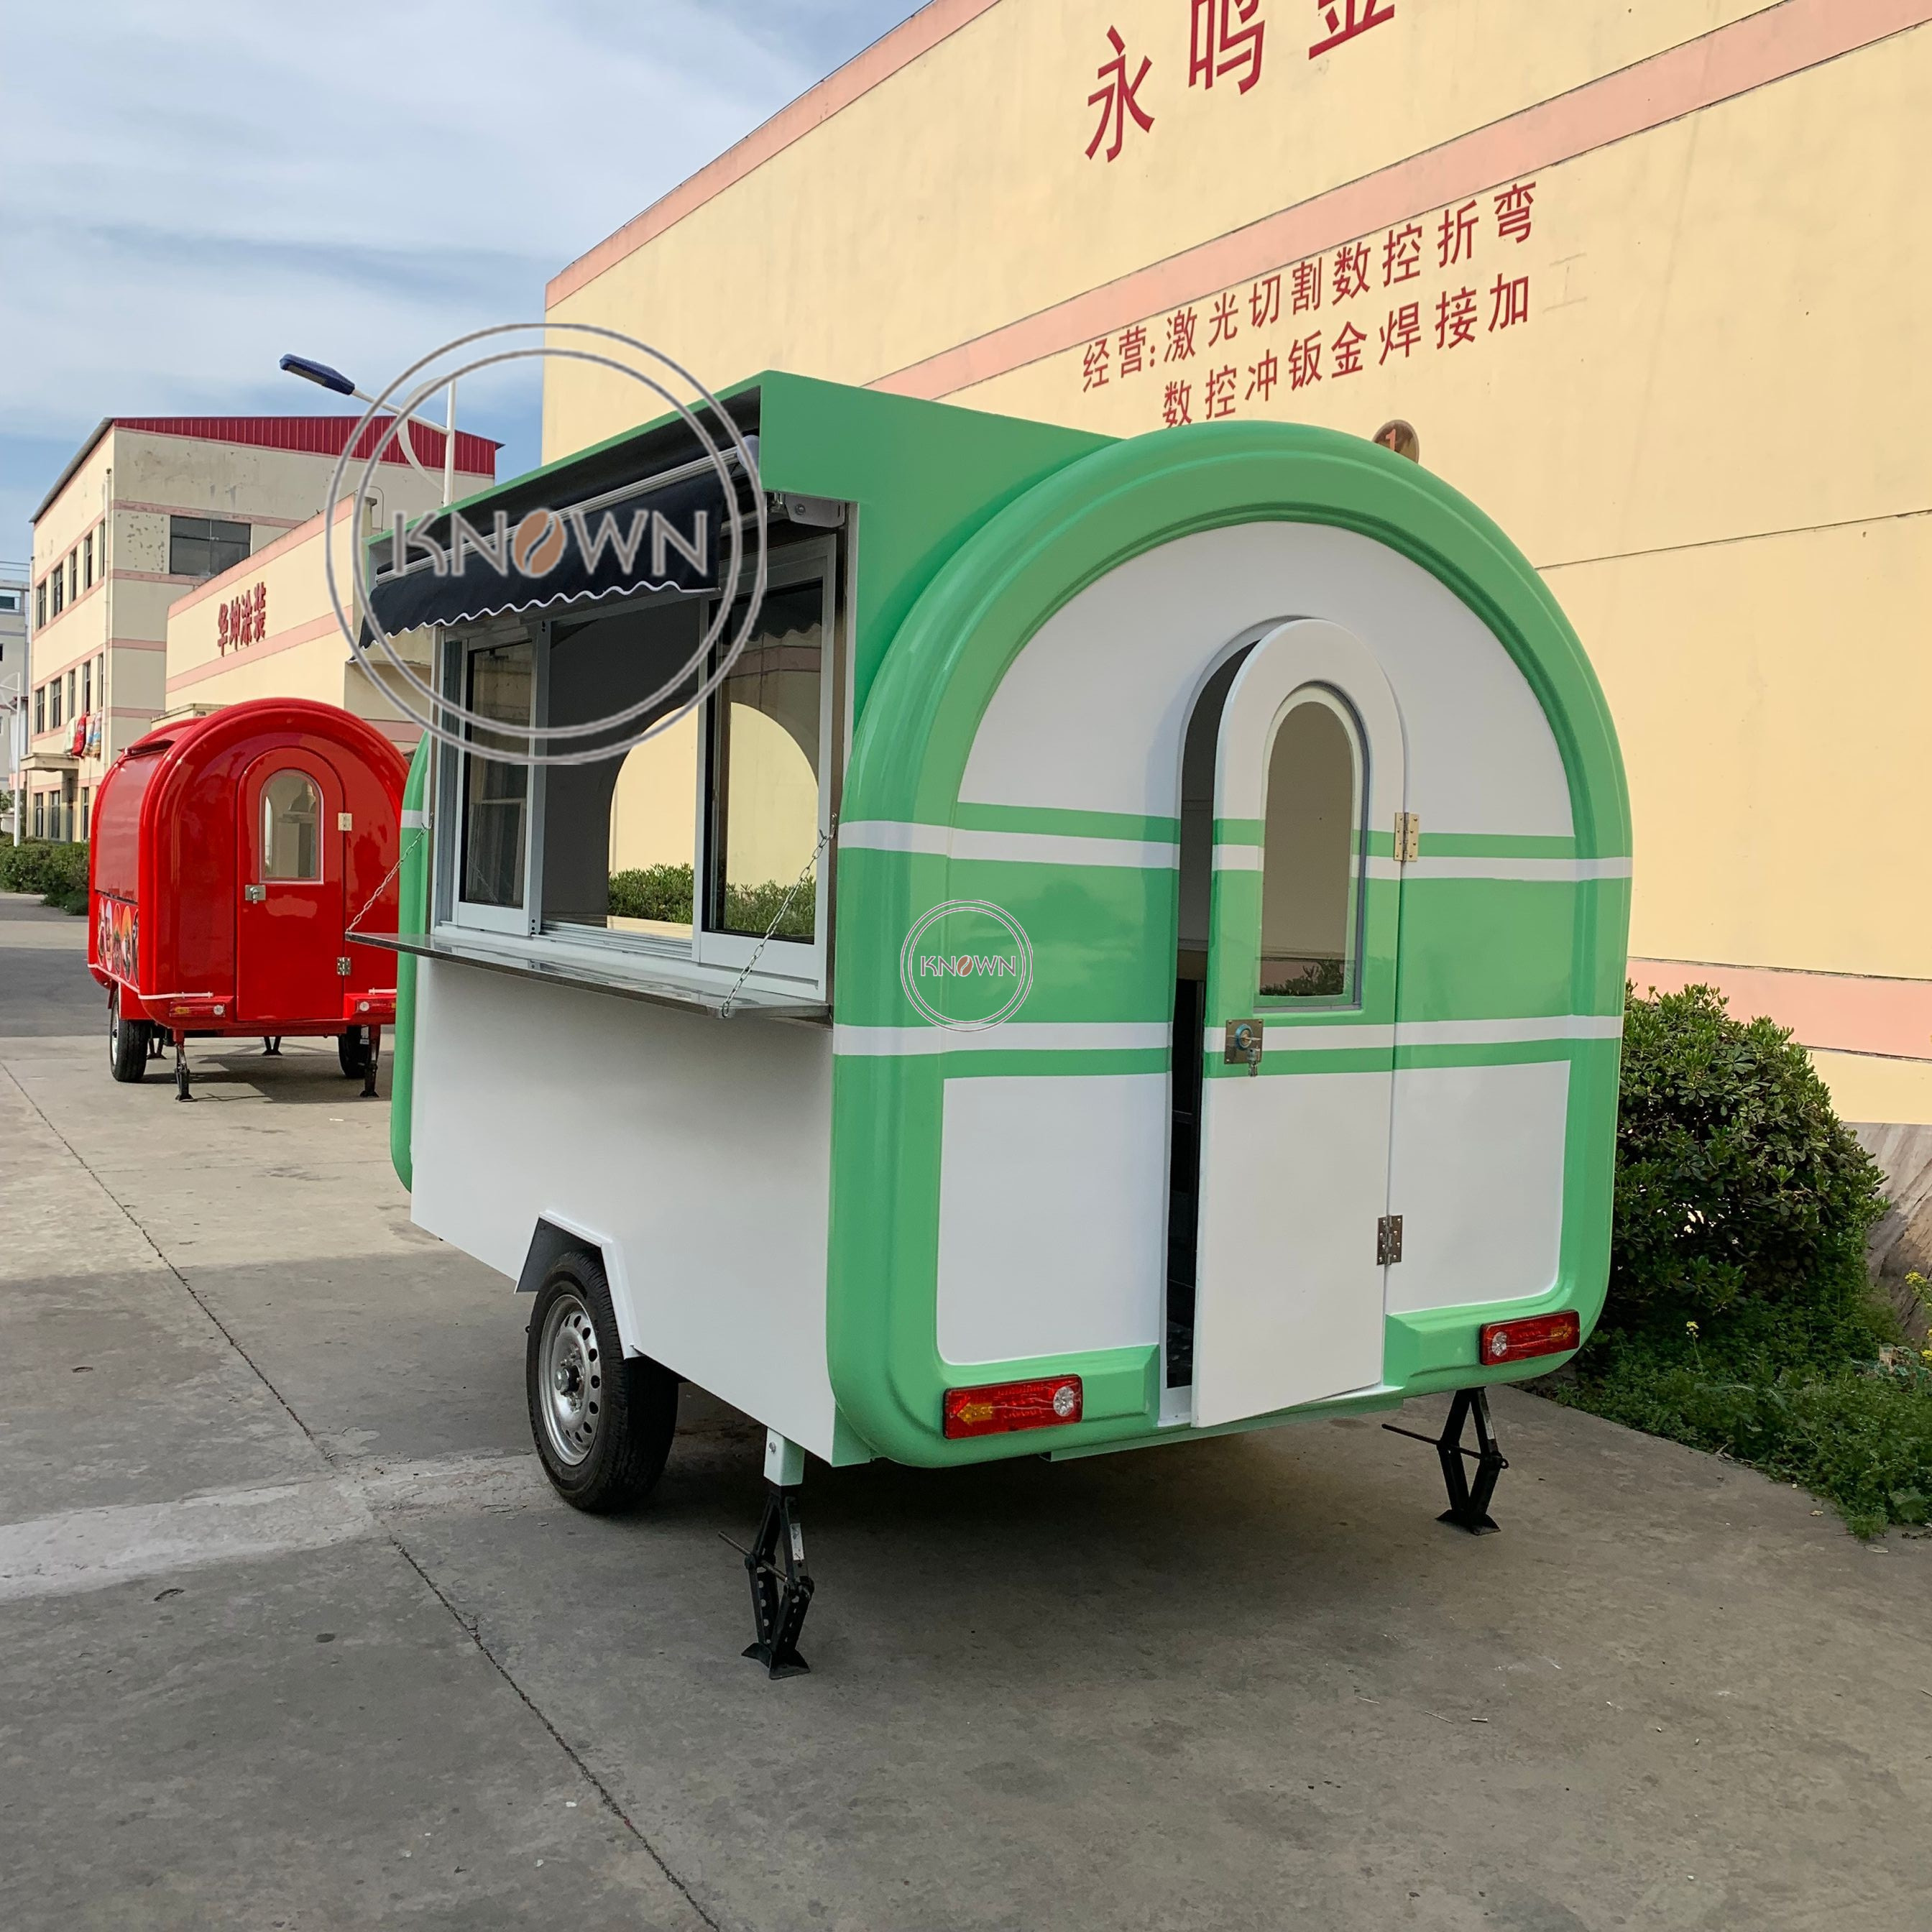 2.8M Catering Trailer Food Truck Mobile Kitchen Street Food Cart for Sale